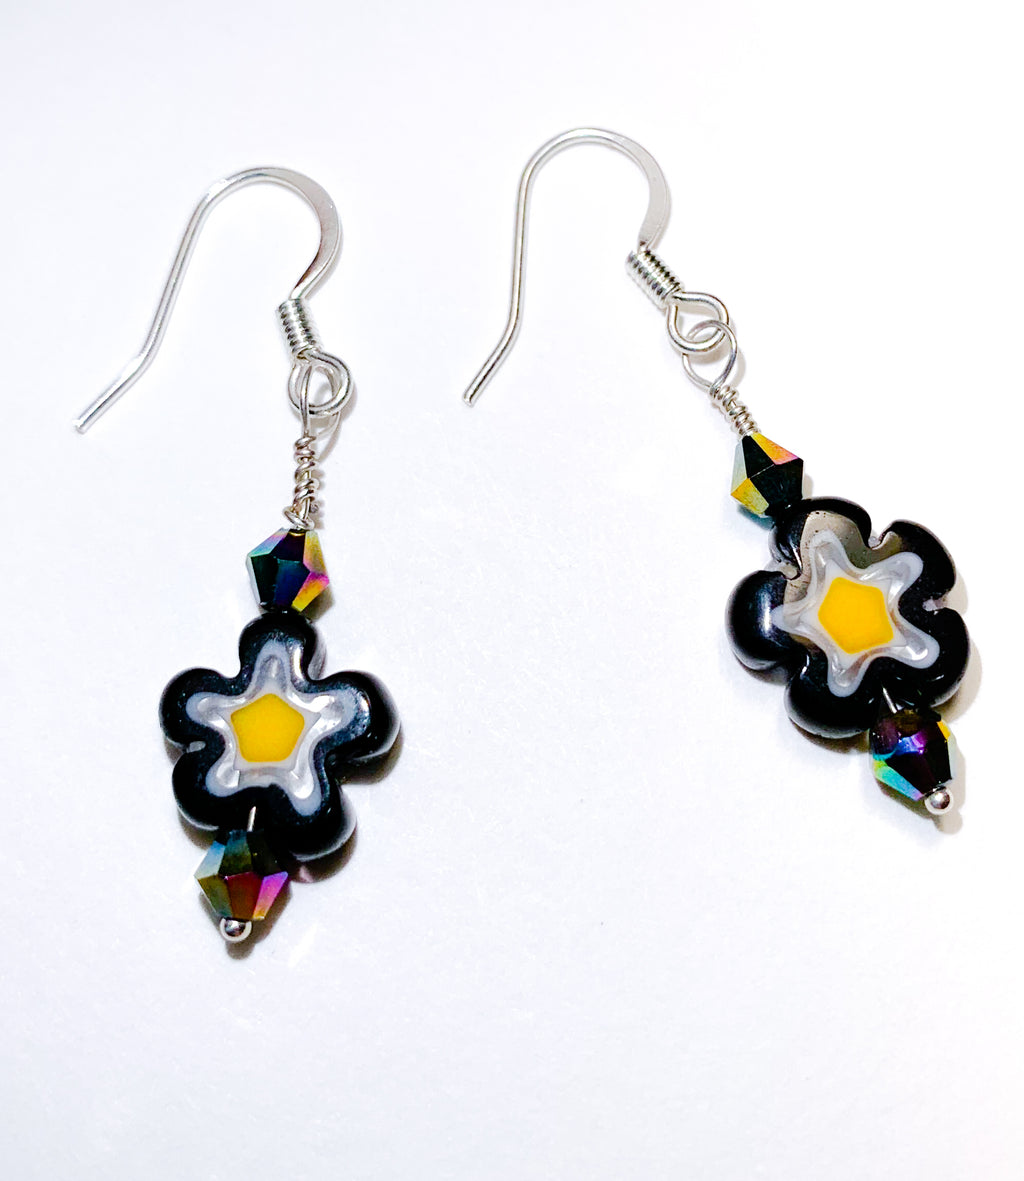 Black Milliefiori Bead Earrings With Holographic Crystals (Sterling Silver, Argentium Silver)